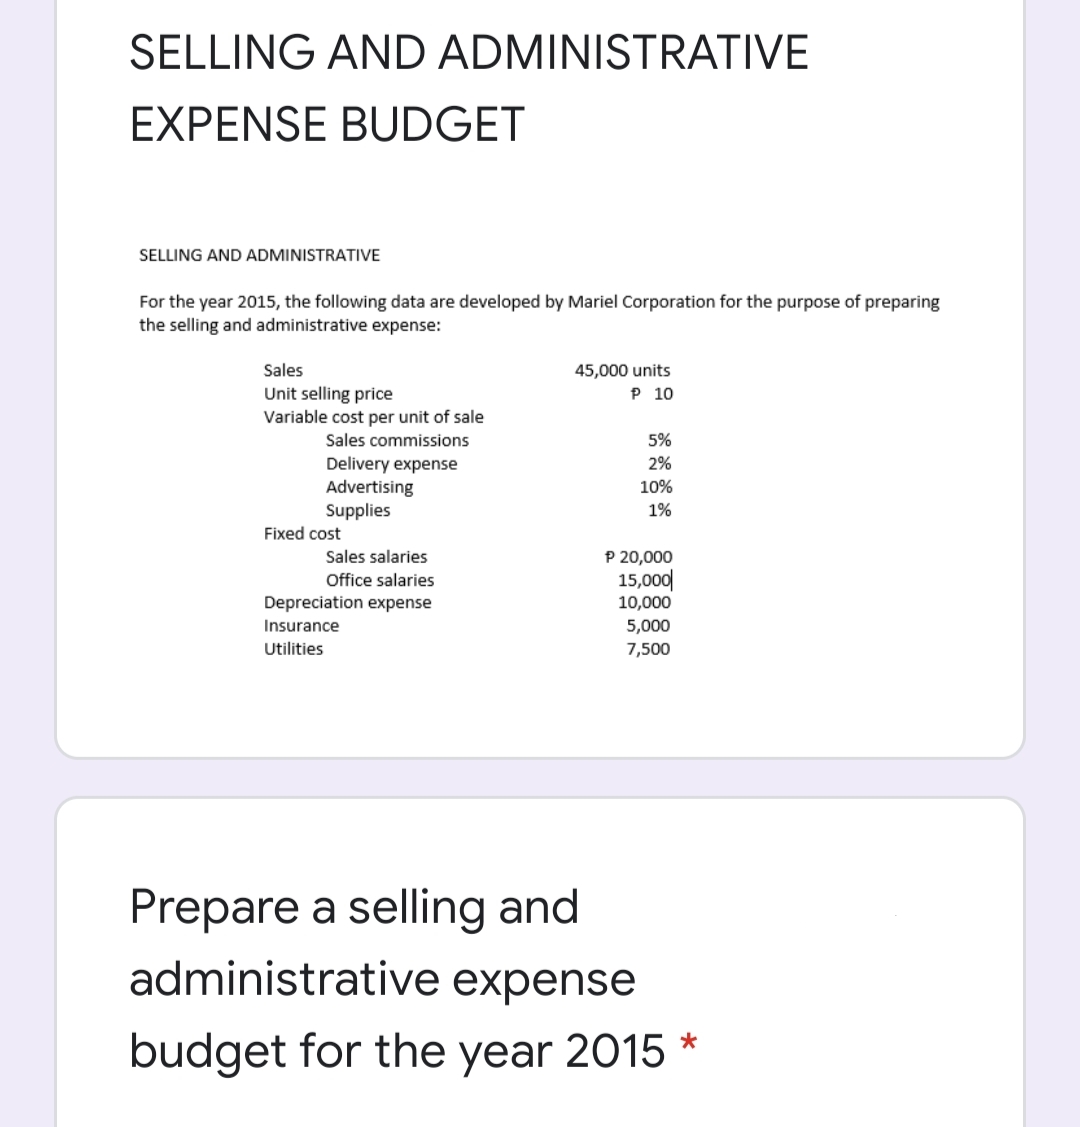 SELLING AND ADMINISTRATIVE
EXPENSE BUDGET
SELLING AND ADMINISTRATIVE
For the year 2015, the following data are developed by Mariel Corporation for the purpose of preparing
the selling and administrative expense:
Sales
45,000 units
P 10
Unit selling price
Variable cost per unit of sale
Sales commissions
5%
Delivery expense
Advertising
Supplies
2%
10%
1%
Fixed cost
P 20,000
15,000|
10,000
Sales salaries
Office salaries
Depreciation expense
Insurance
5,000
Utilities
7,500
Prepare a selling and
administrative expense
budget for the year 2015 *
